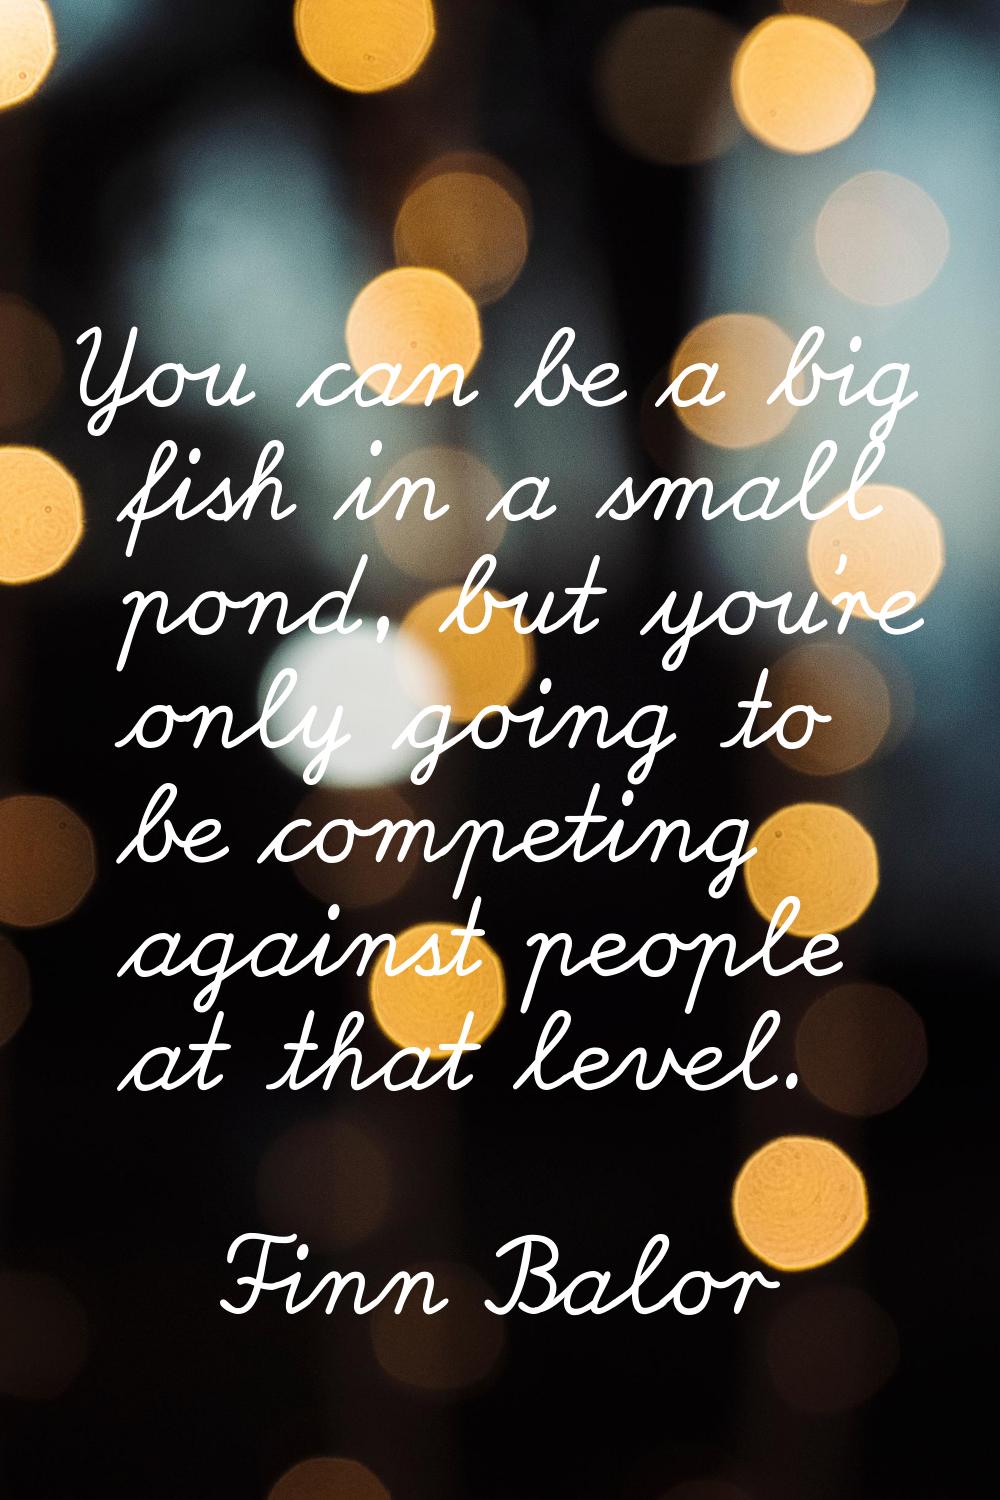 You can be a big fish in a small pond, but you're only going to be competing against people at that